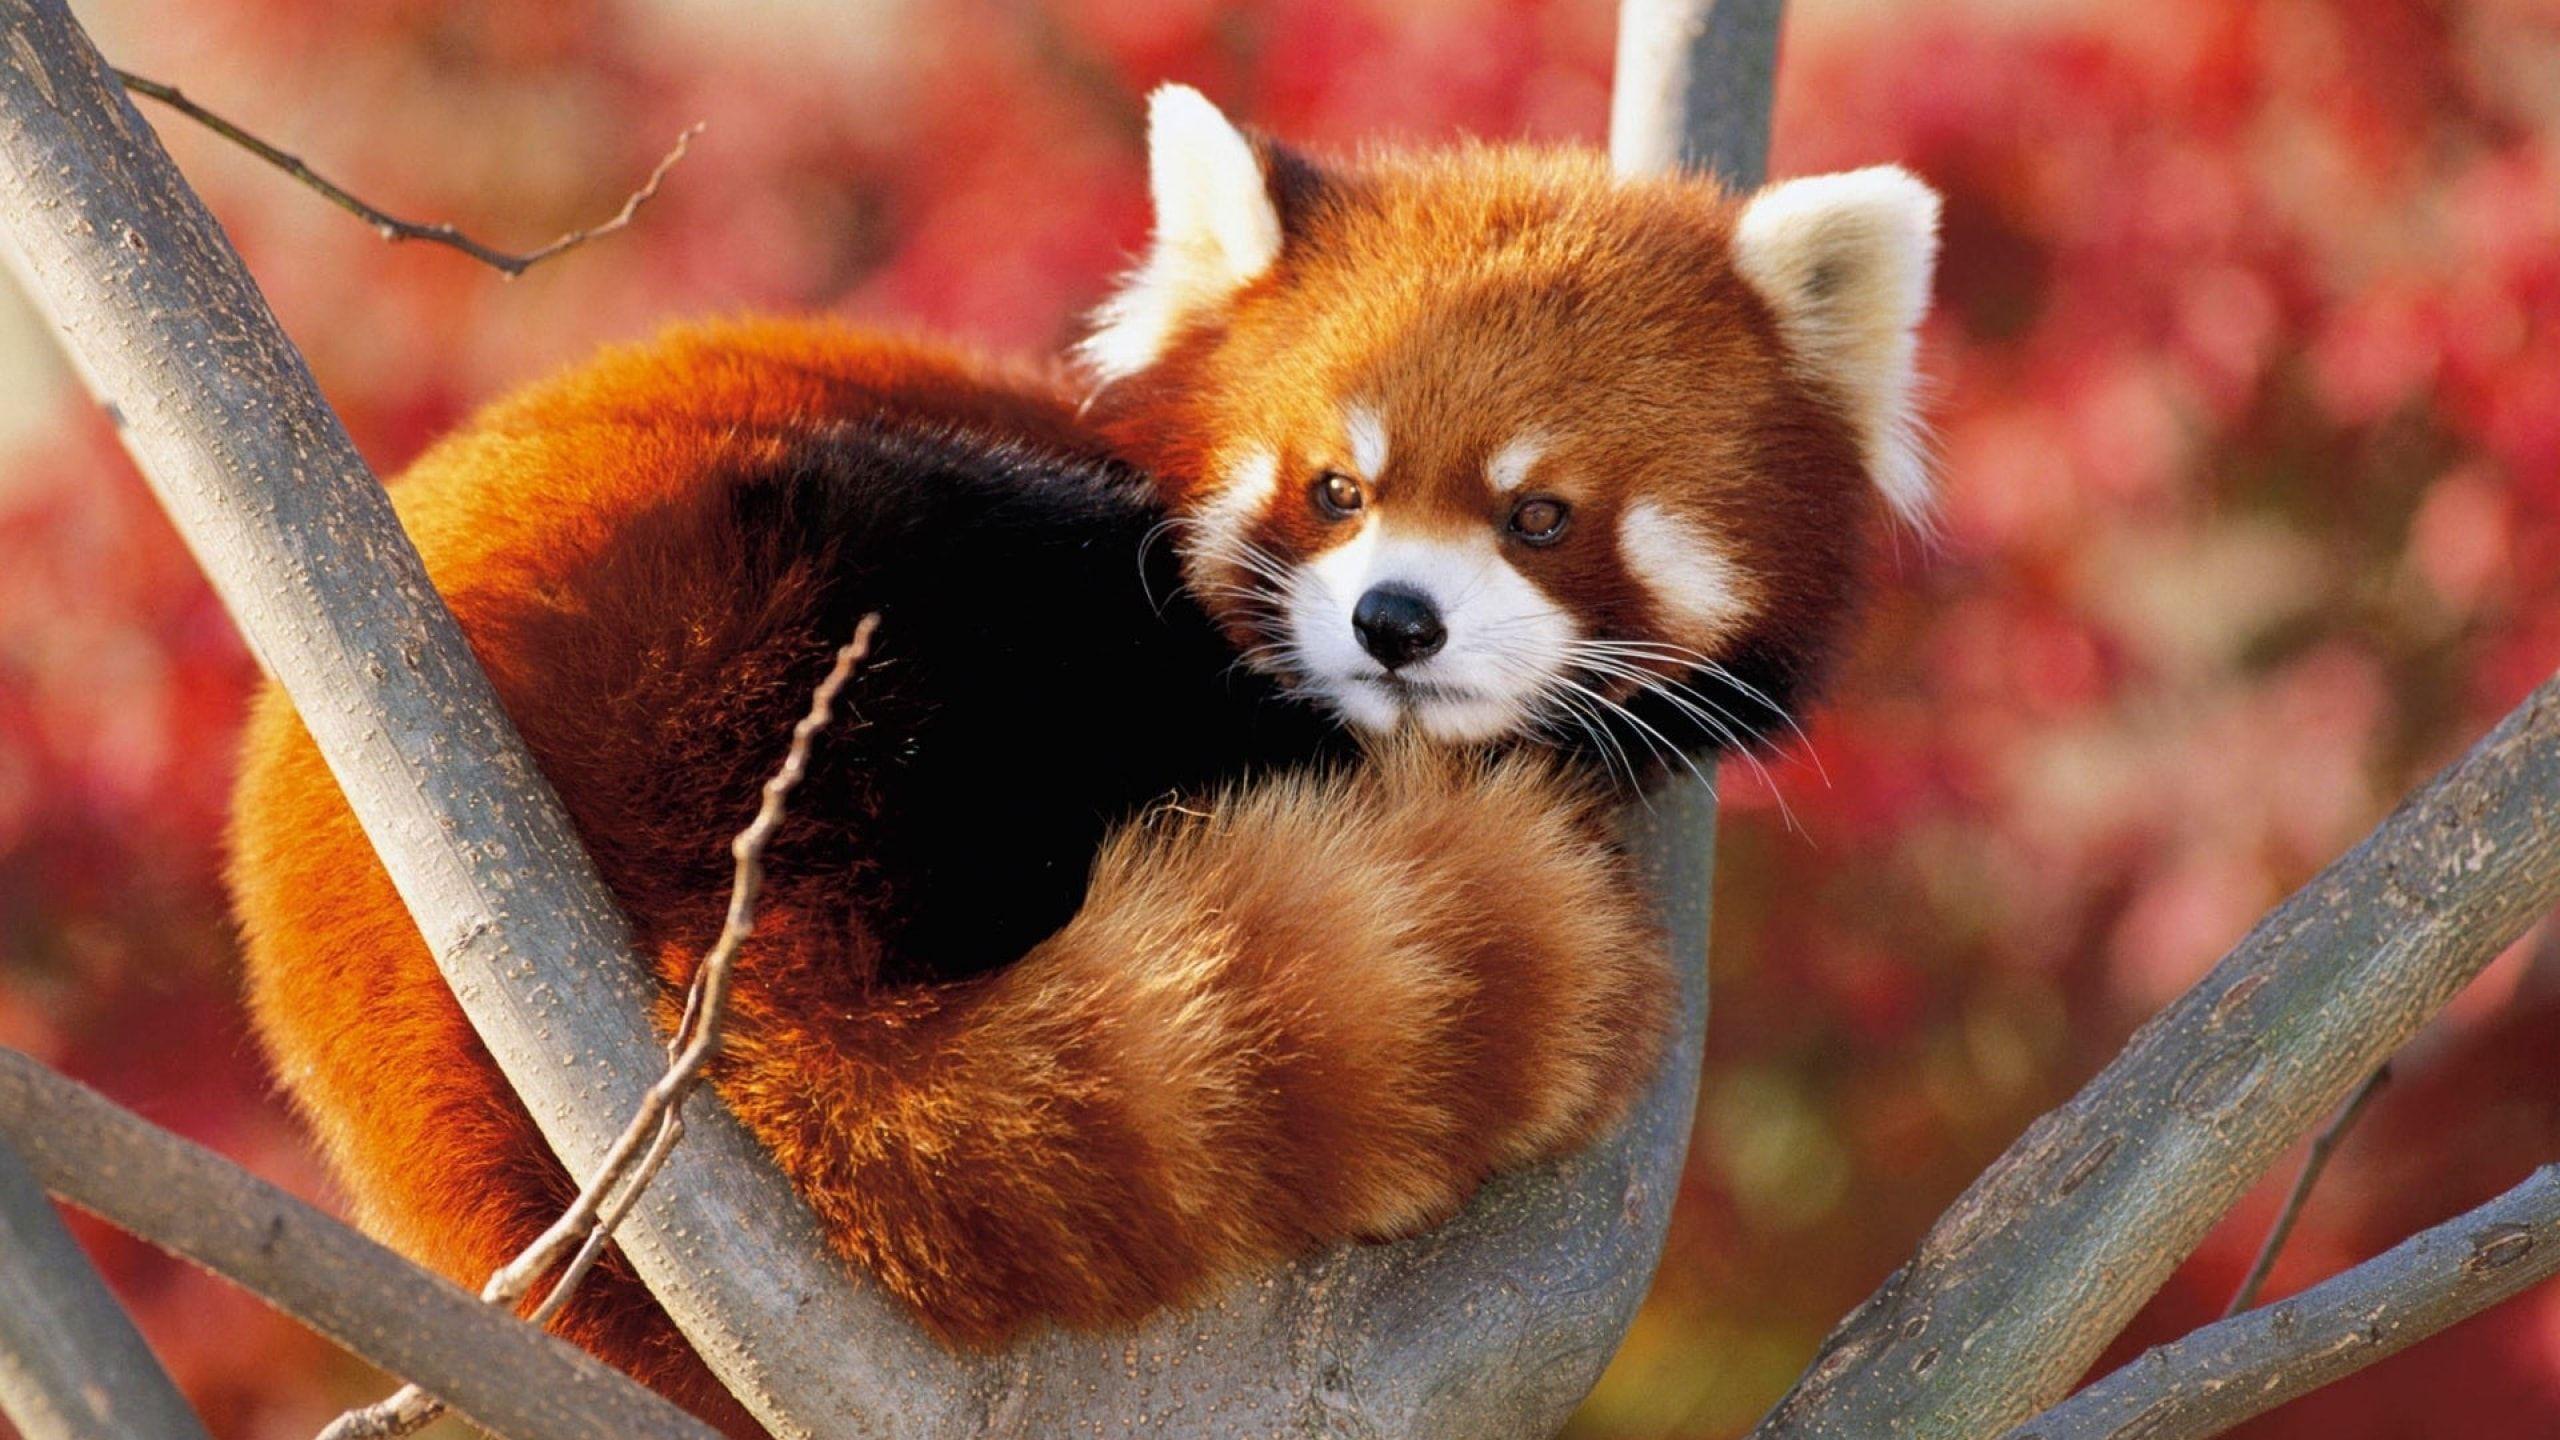 Red panda 4k ultra hd 16:10 wallpapers hd, desktop backgrounds 3840x2400,  images and pictures